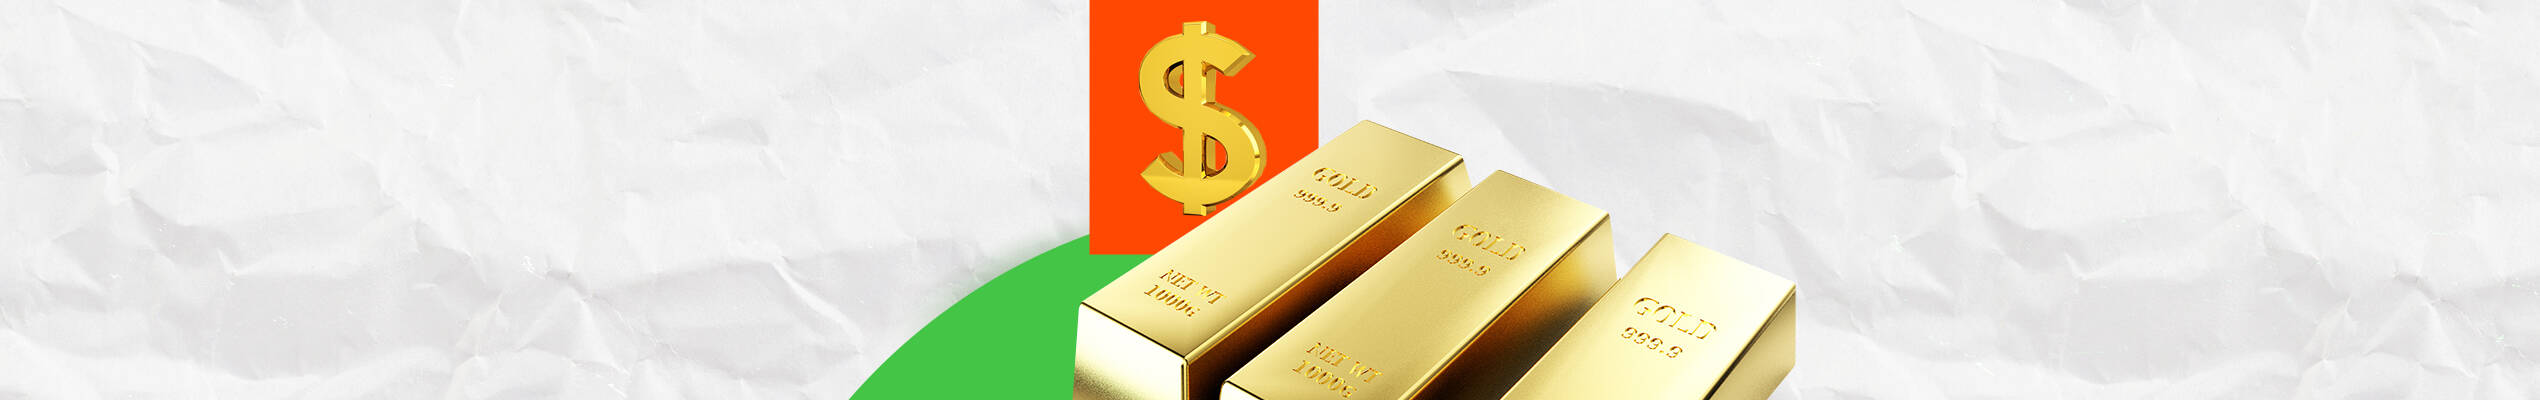 Gold prices rose ahead of Fed statement